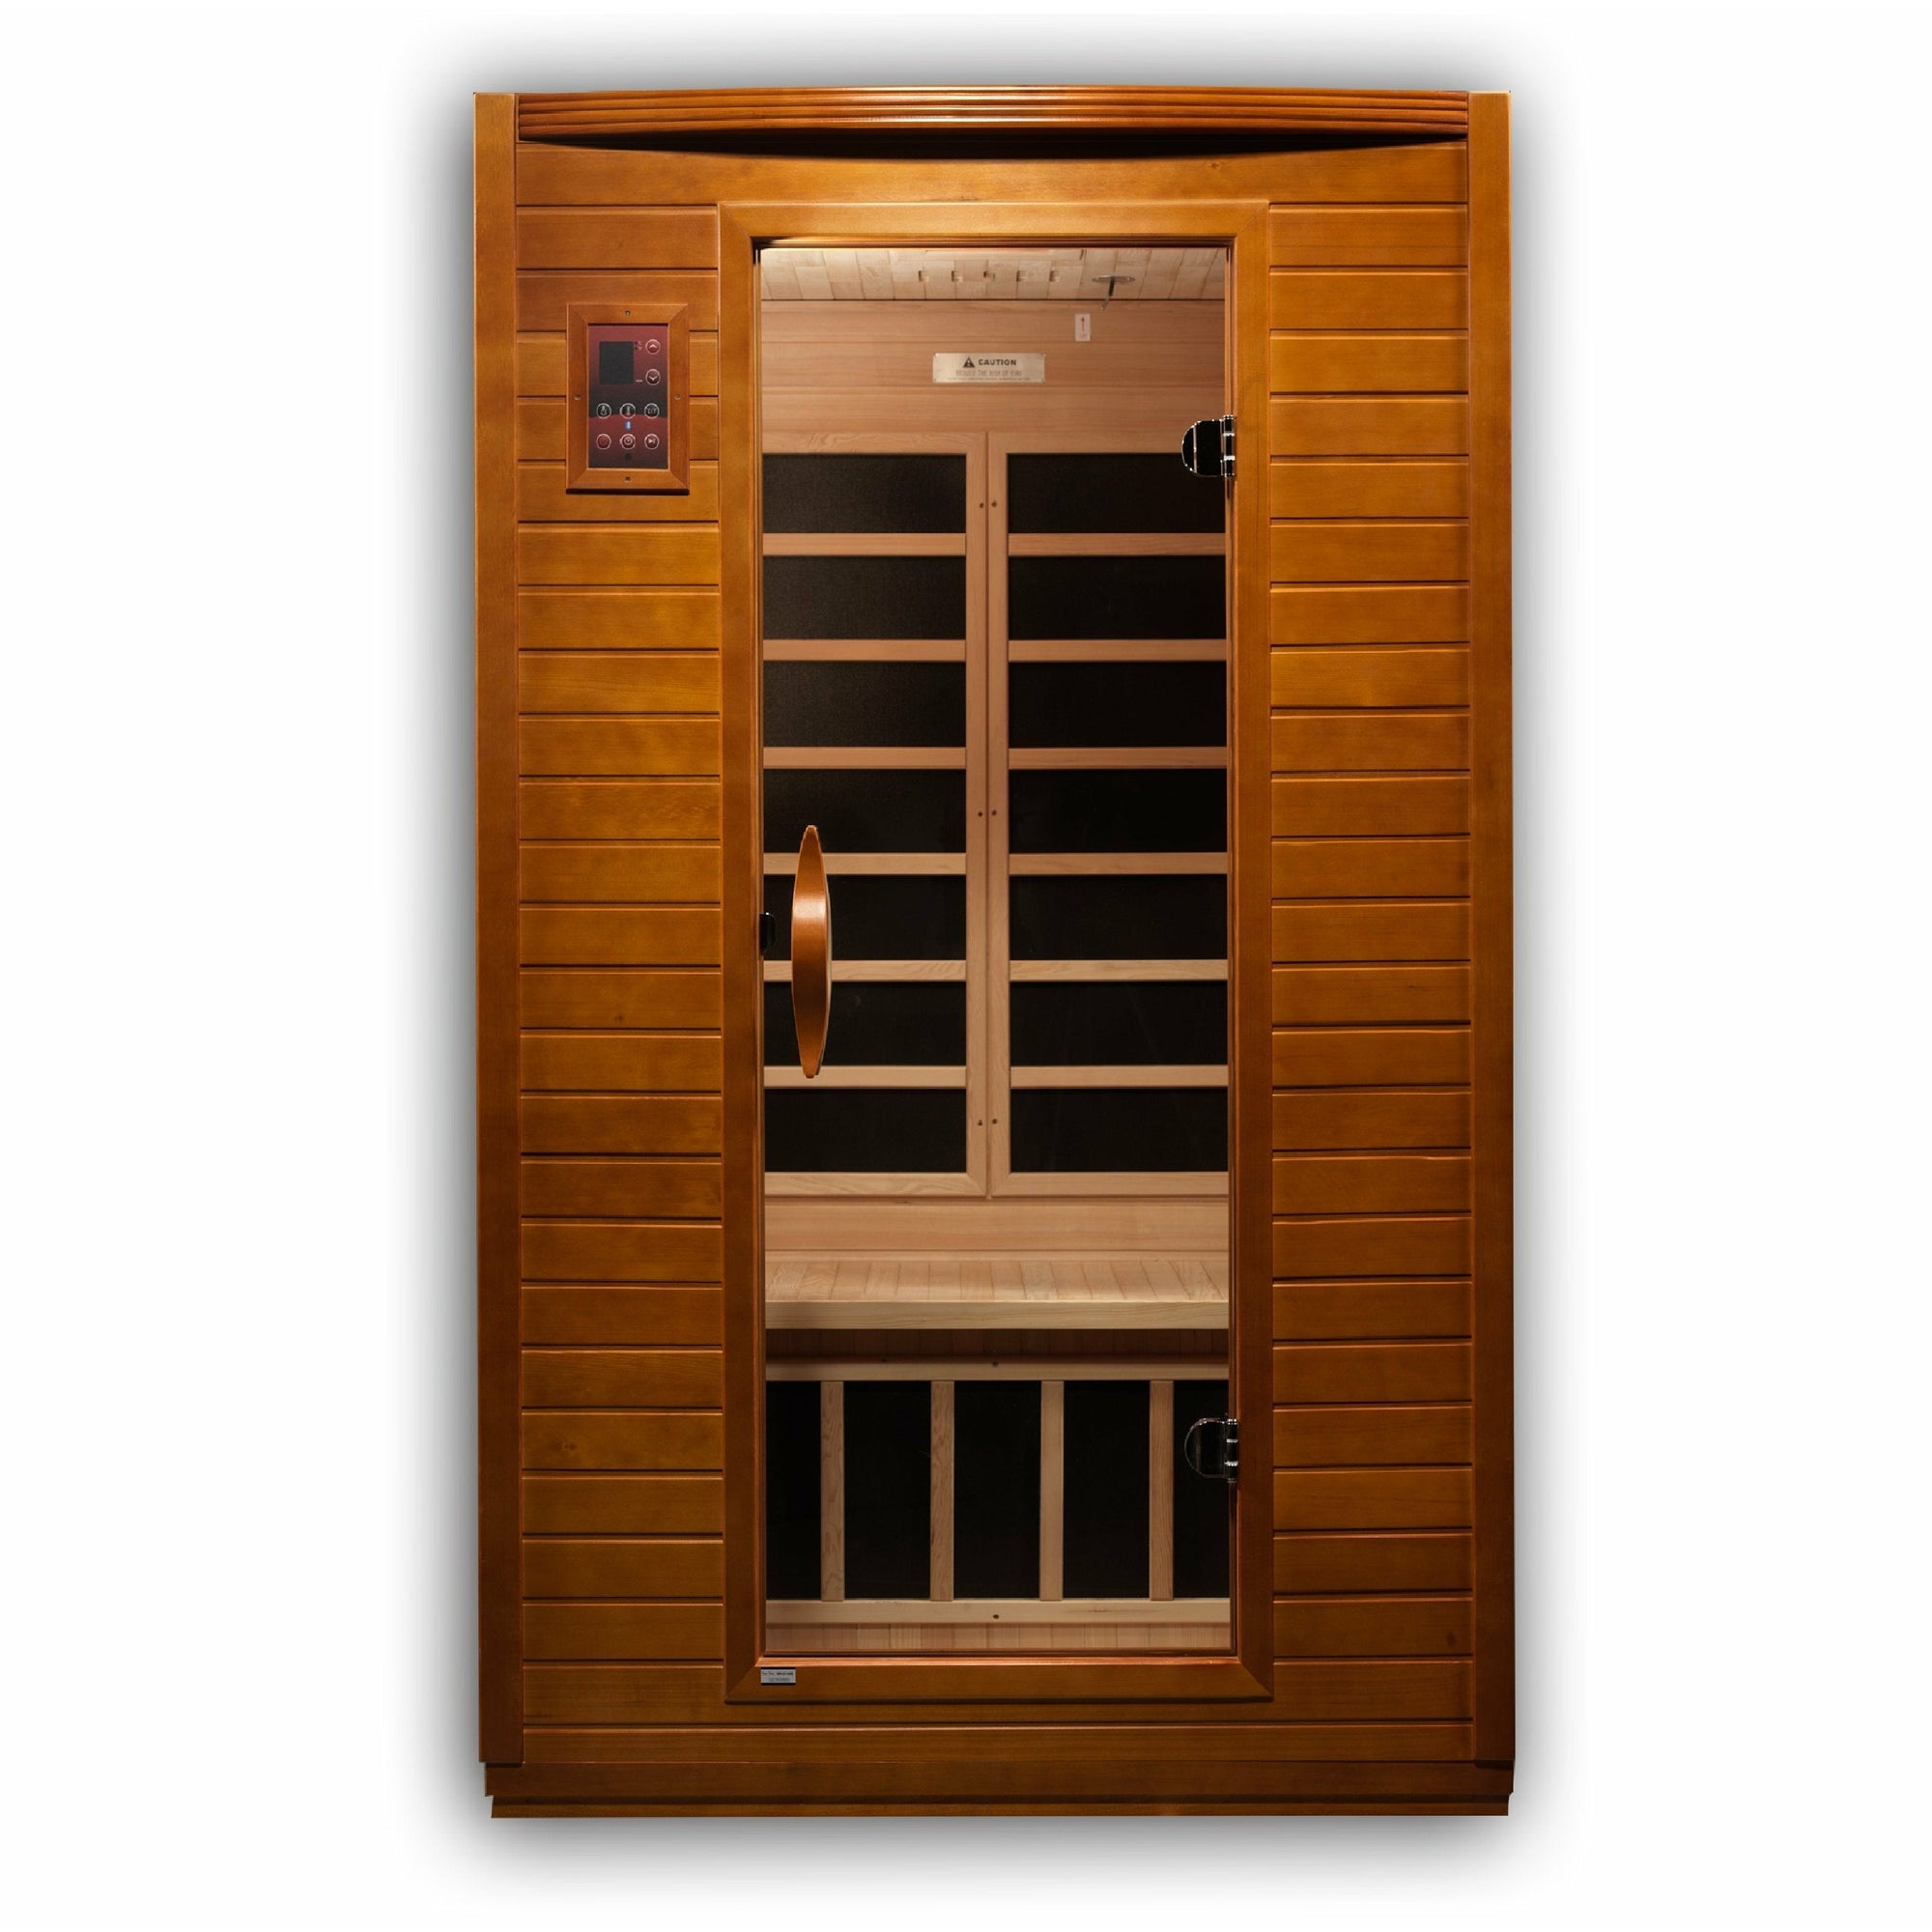 Dynamic Versailles Edition Low EMF Far Infrared Sauna Natural hemlock wood construction Roof vent with Tempered glass door and exterior LED control panel isometric view in white background